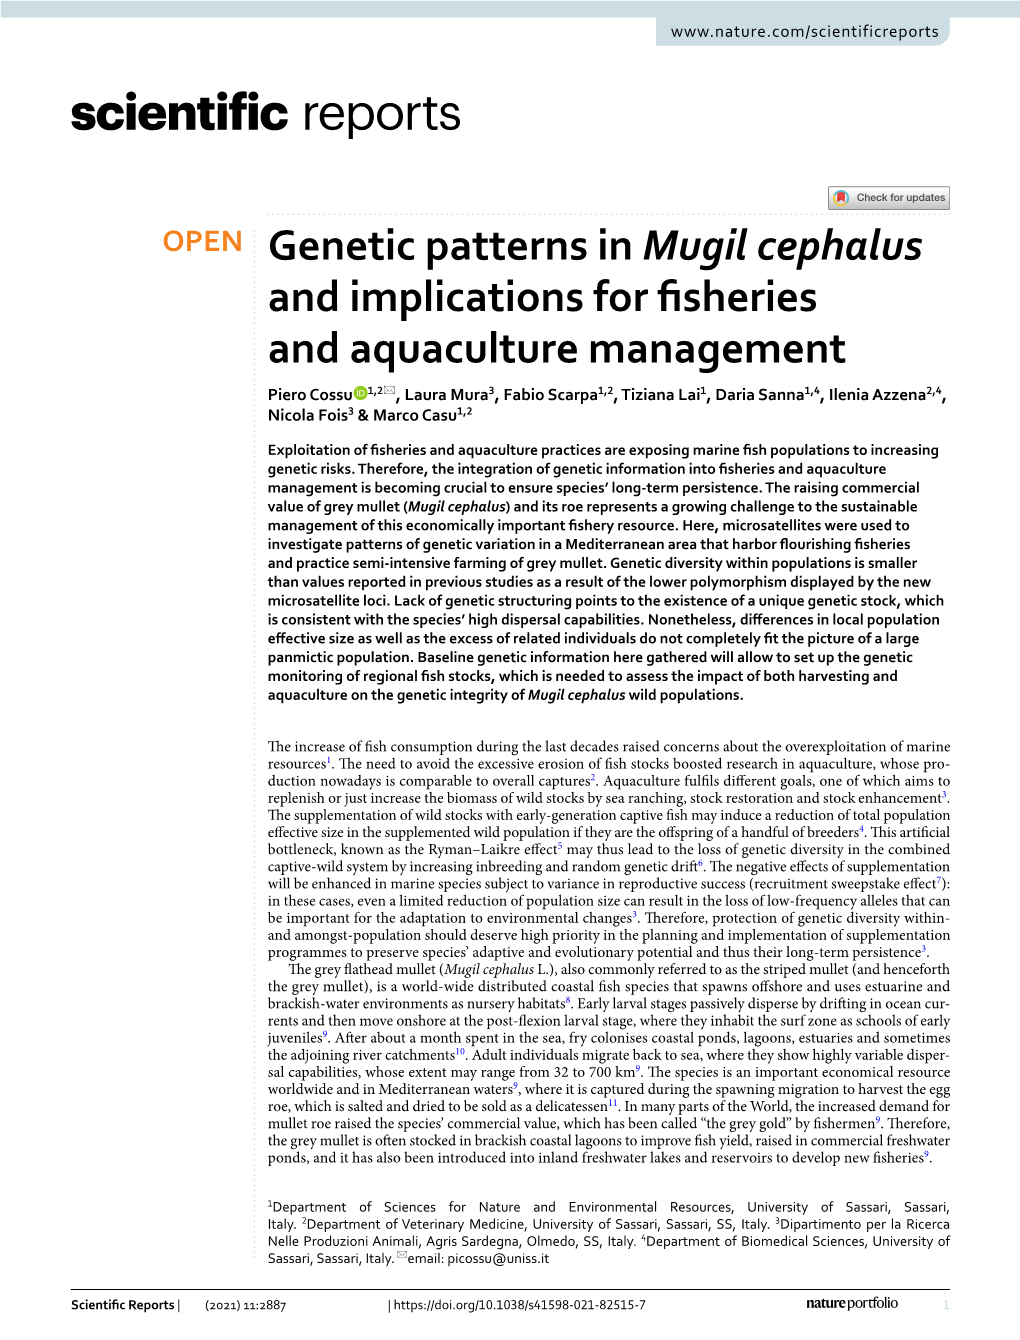 Genetic Patterns in Mugil Cephalus and Implications for Fisheries And